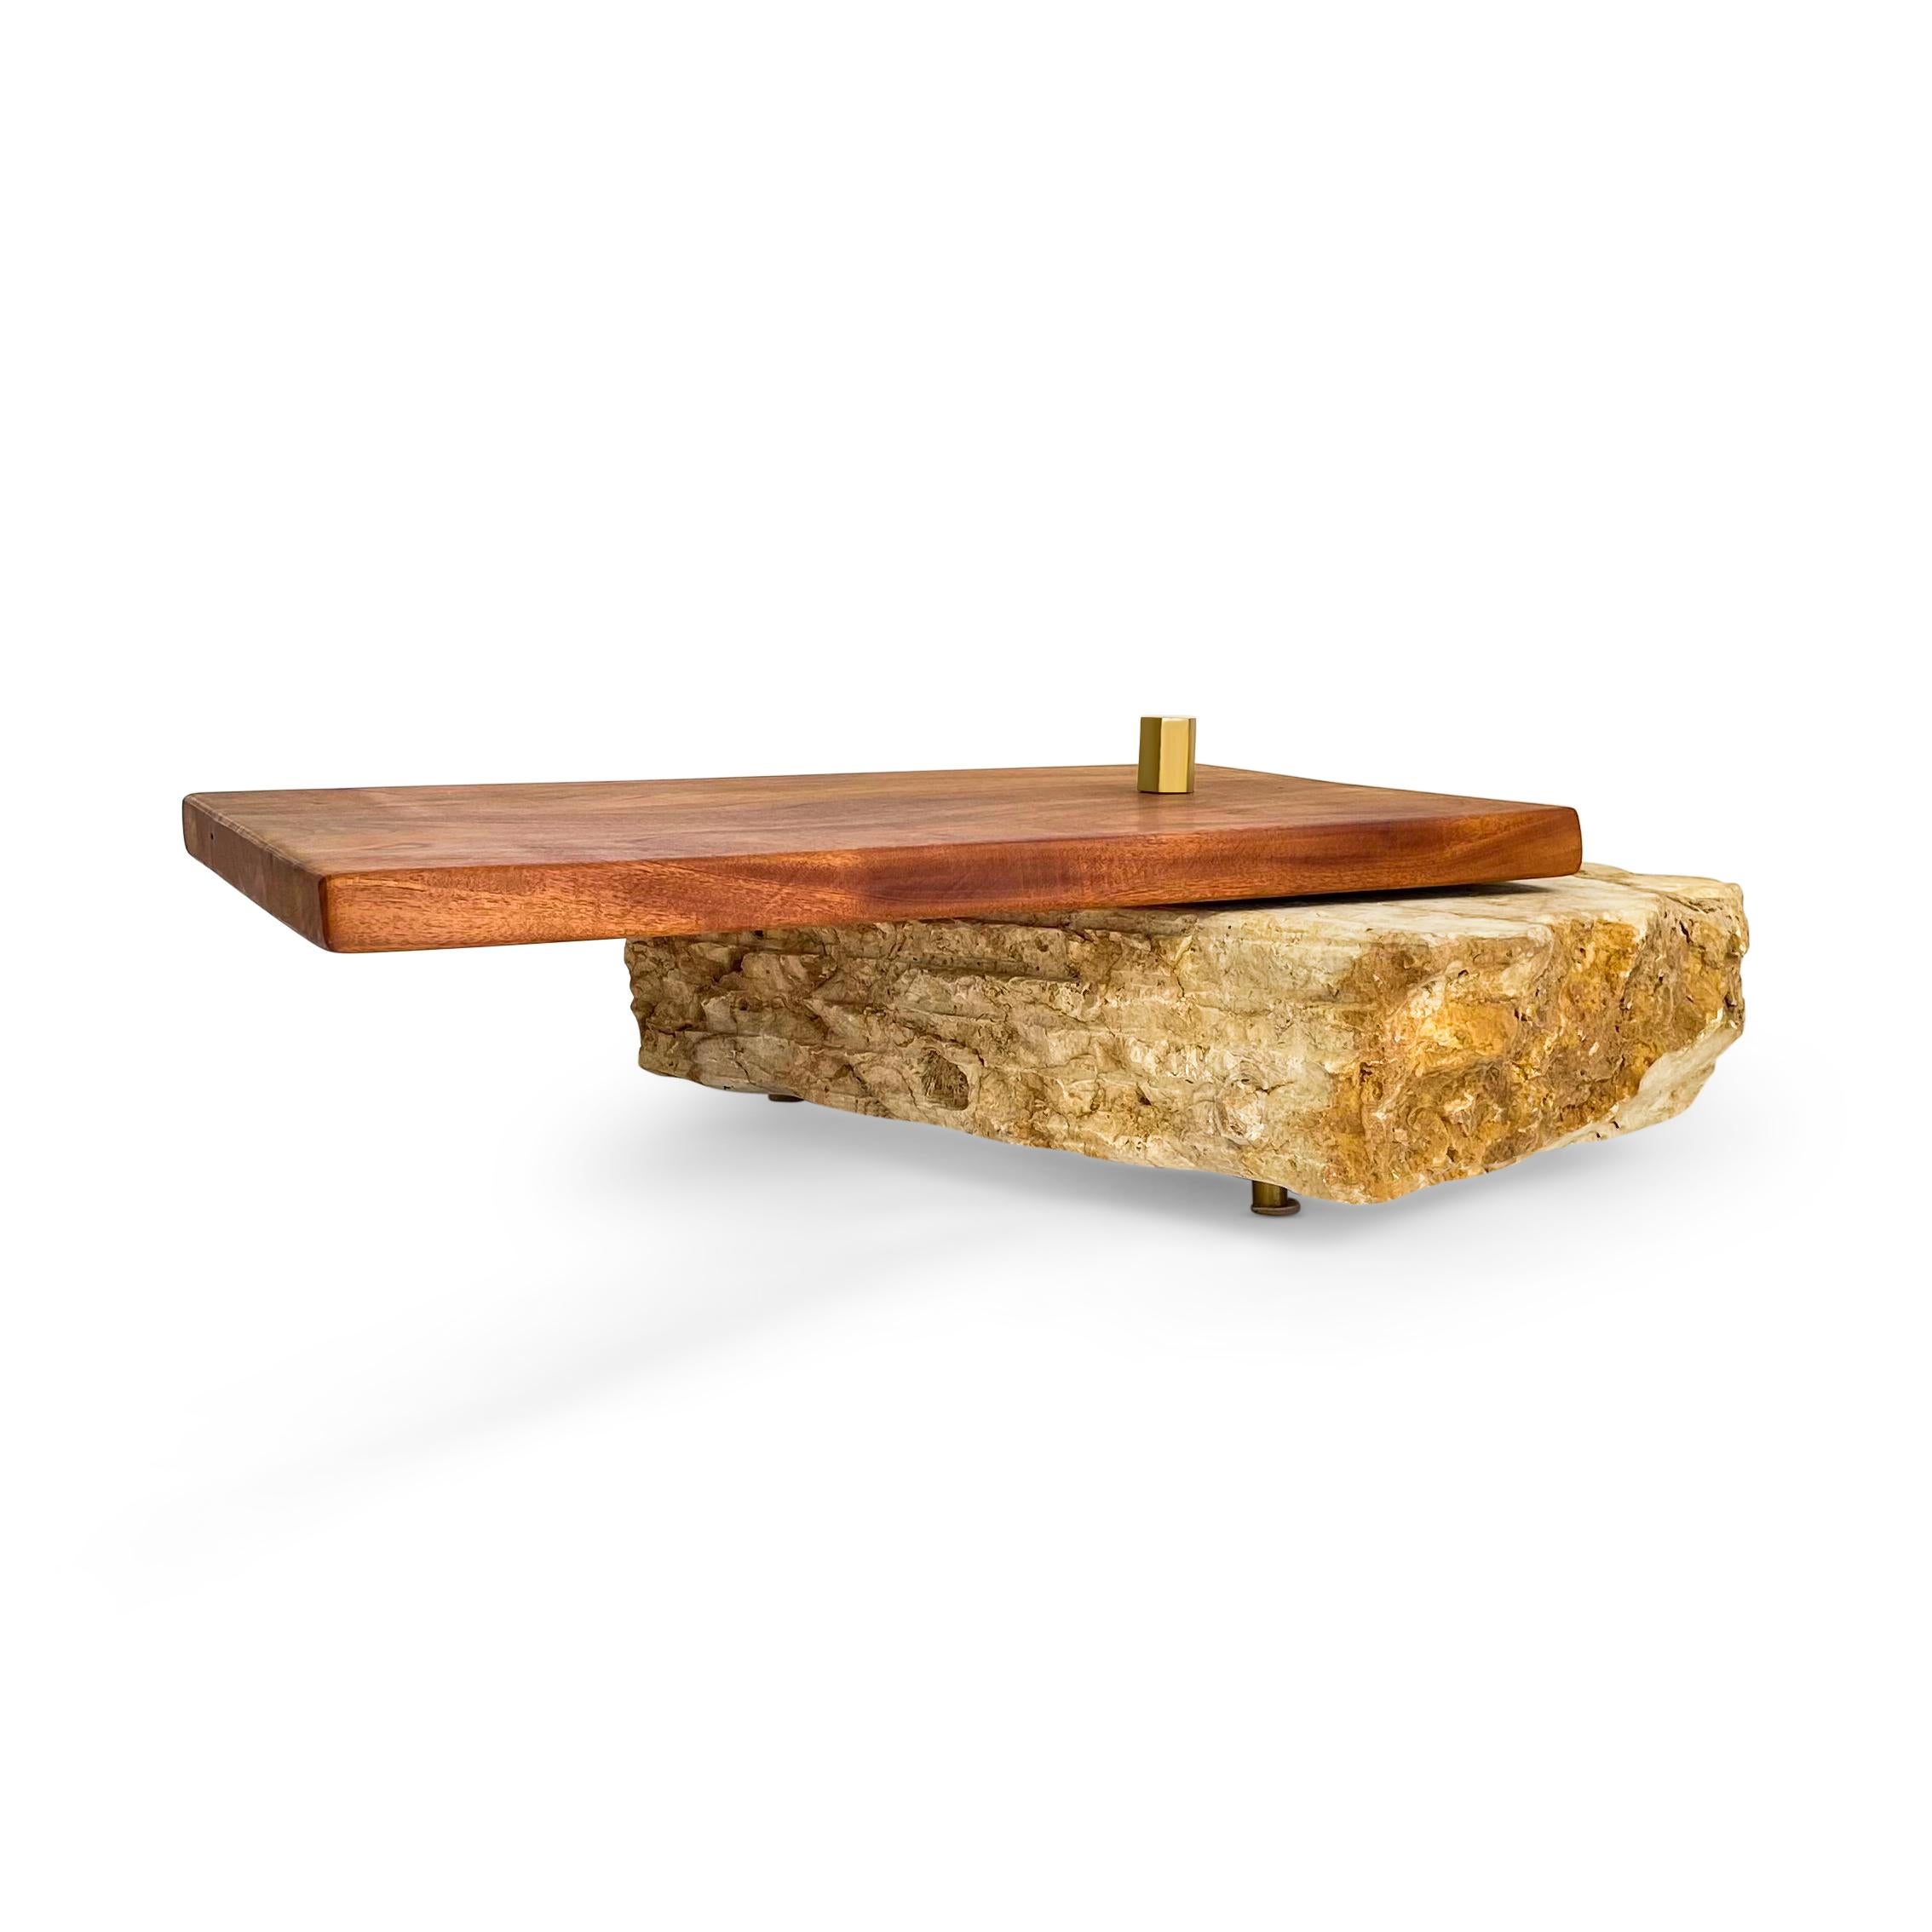 Puerto Rican Arpegio II: Dynamic Coral & Mahogany Rotating Table For Sale